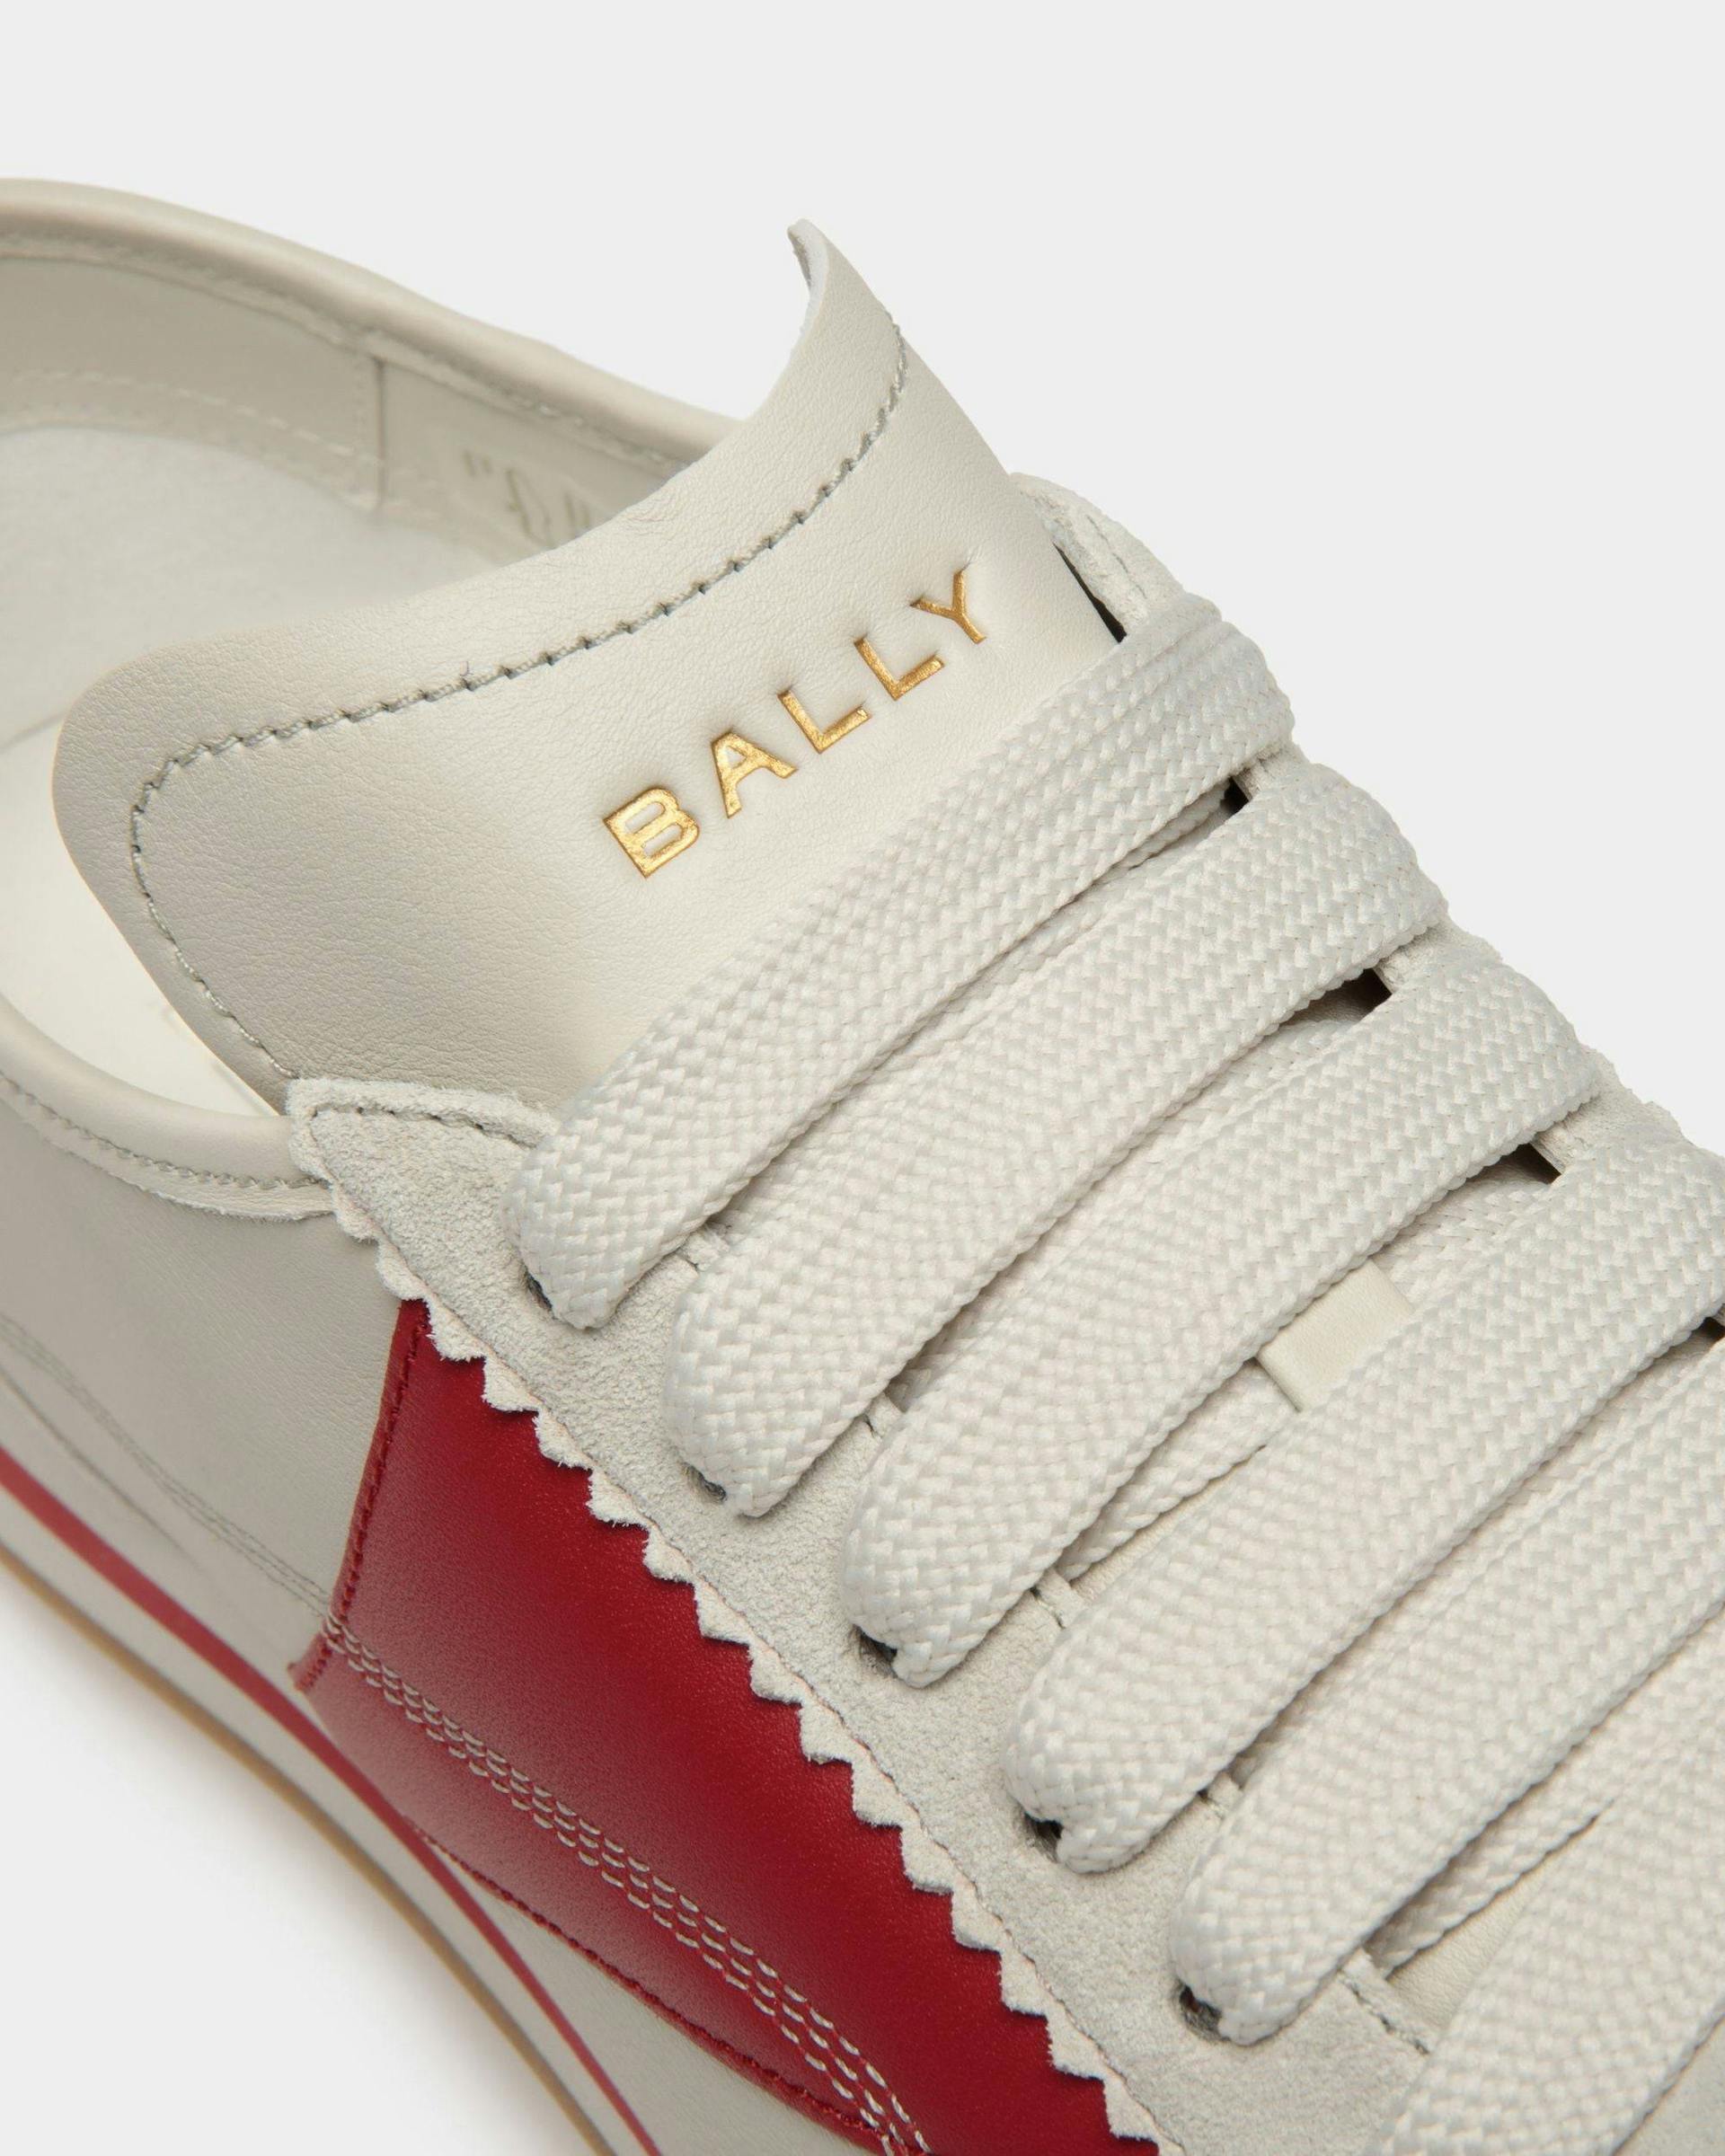 Sussex Sneakers In Dusty White And Deep Ruby Leather - Men's - Bally - 05